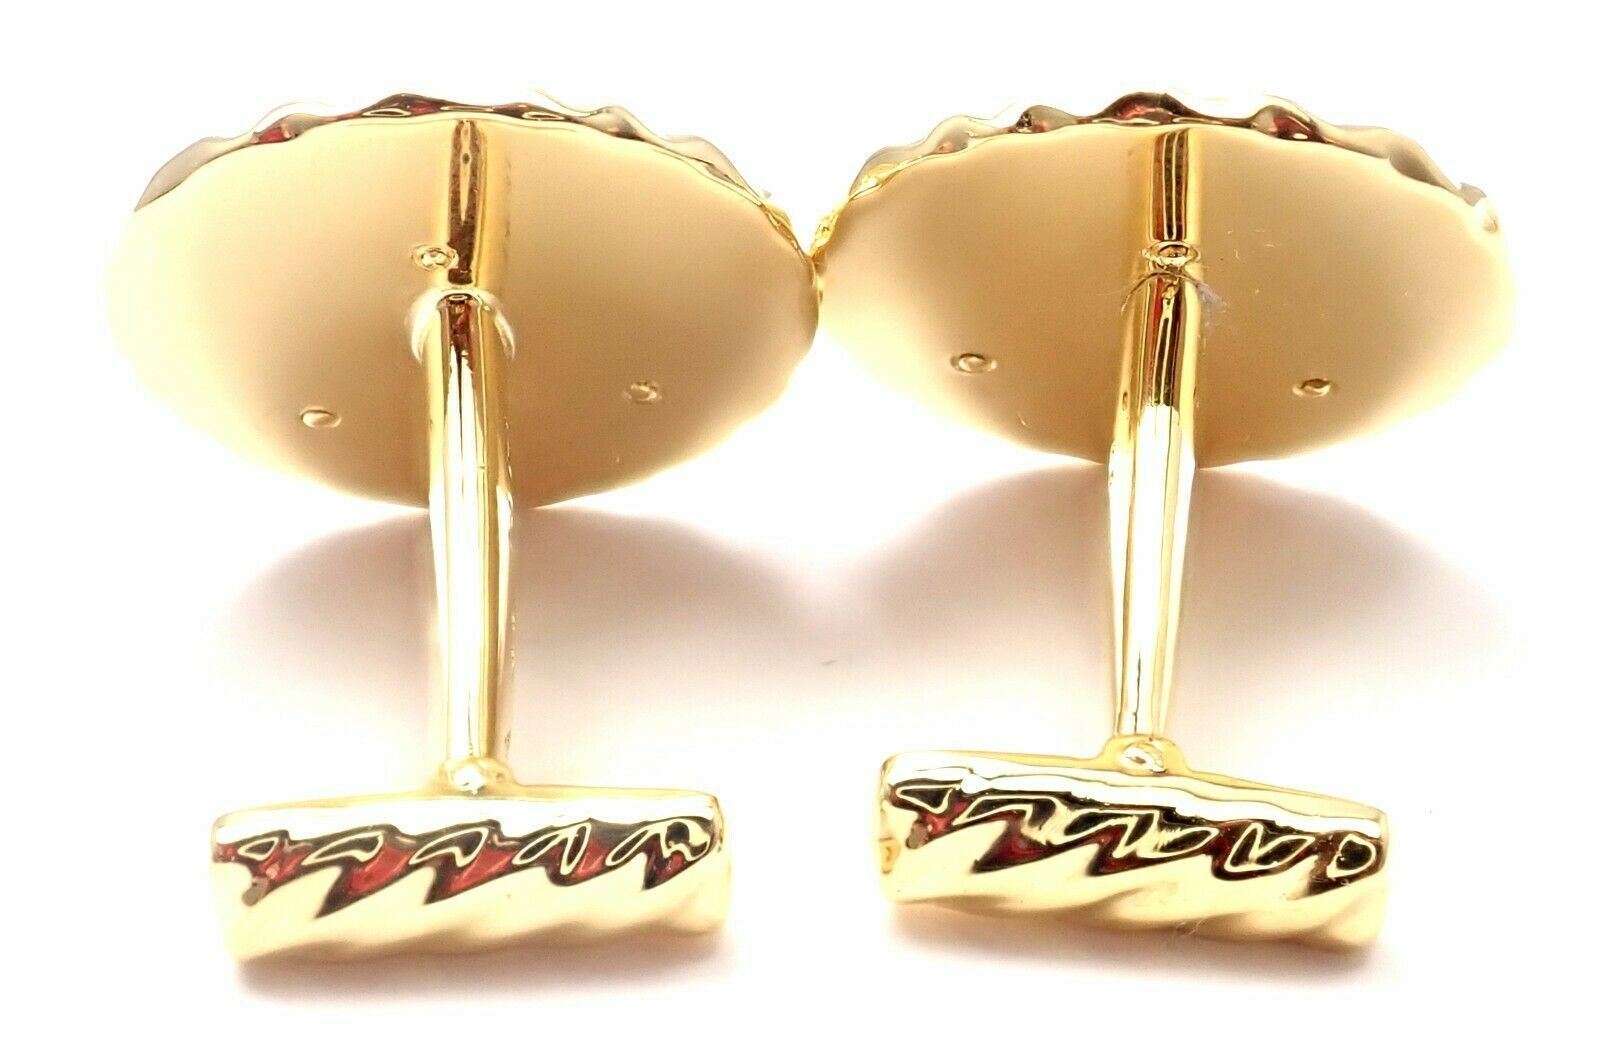 Van Cleef & Arpels Jewelry & Watches:Men's Jewelry:Cufflinks Rare! Authentic Van Cleef & Arpels 18k Yellow Gold Panther Panthere Cufflinks